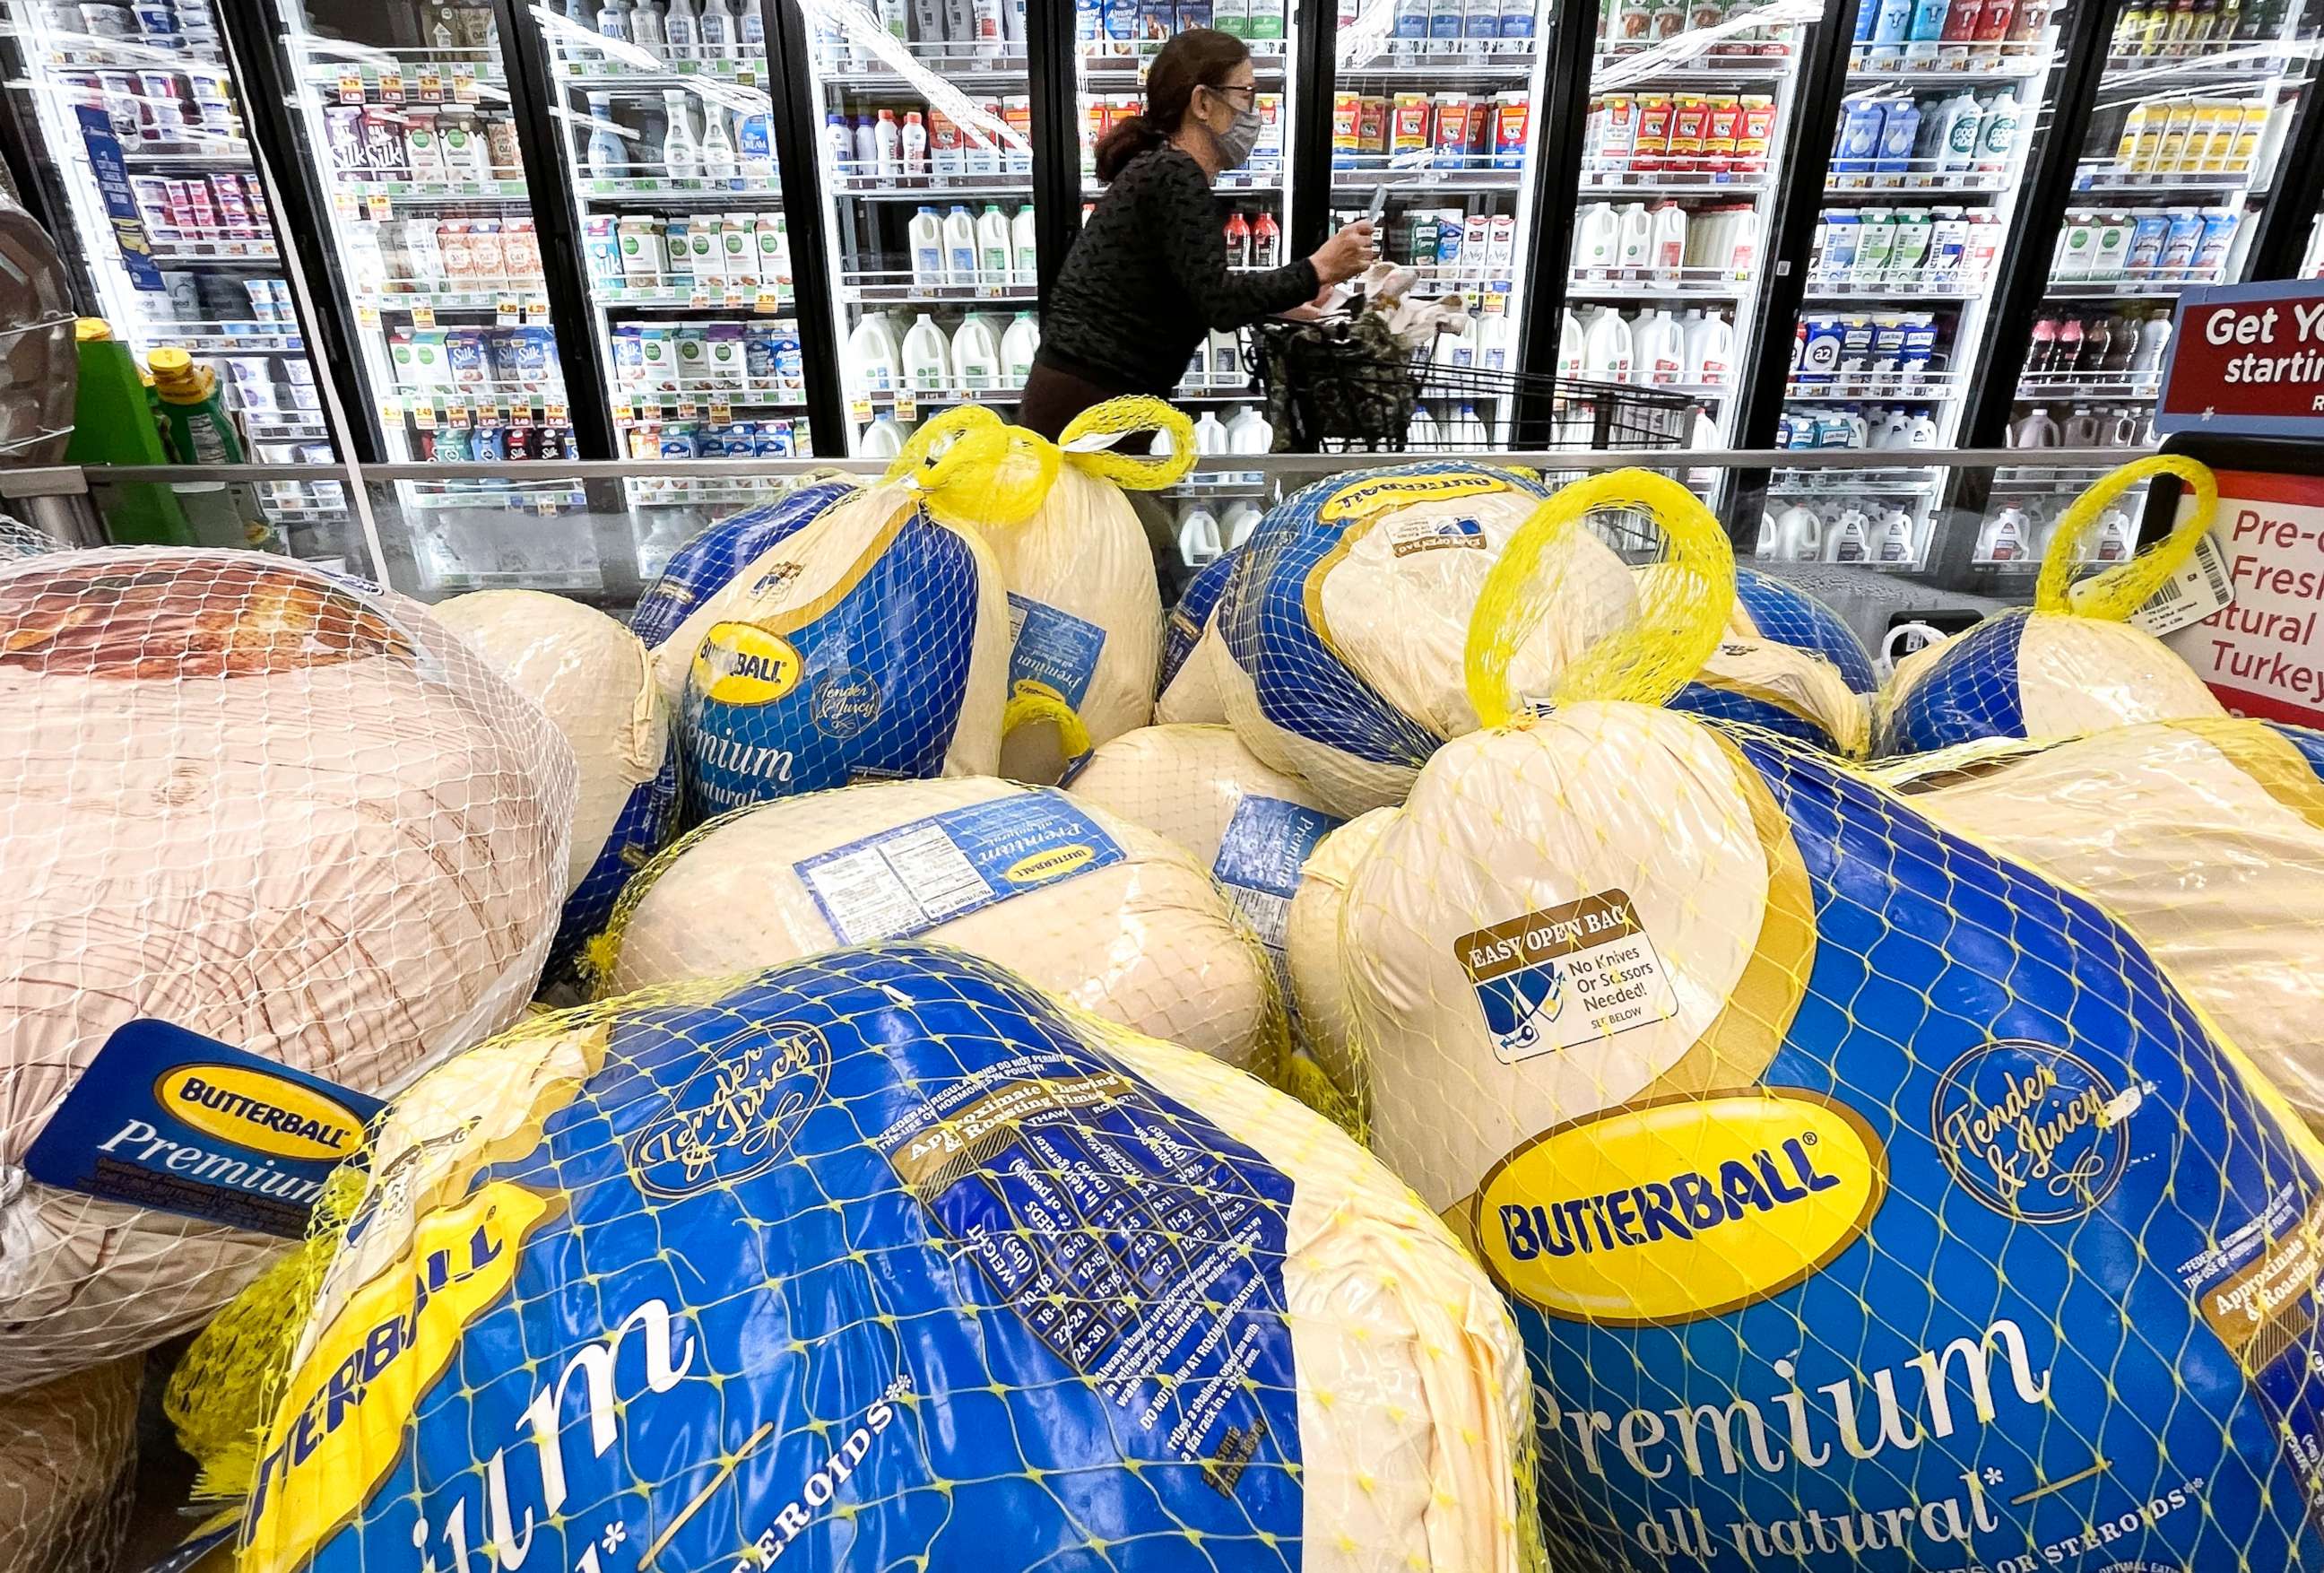 PHOTO: A shopper walks past turkeys displayed for sale in a grocery store ahead of the Thanksgiving holiday on Nov. 11, 2021, in Los Angeles.